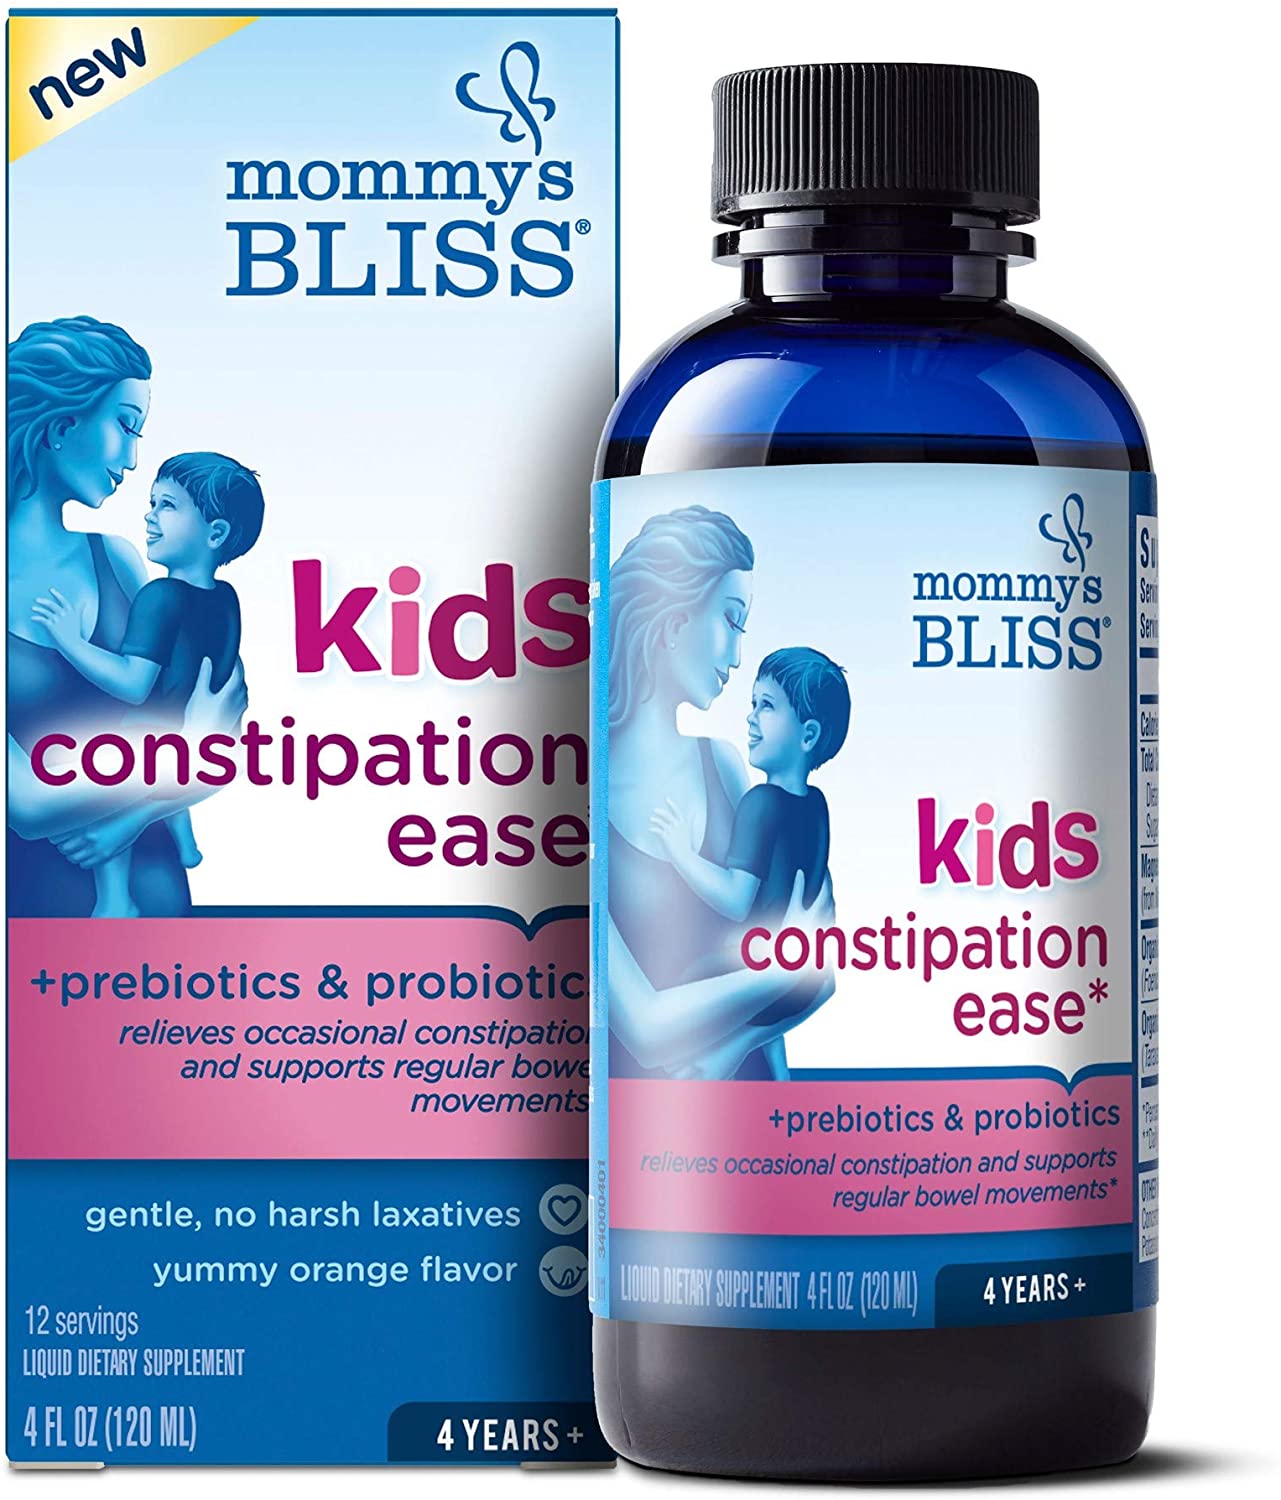 Mommys bliss constipation ease